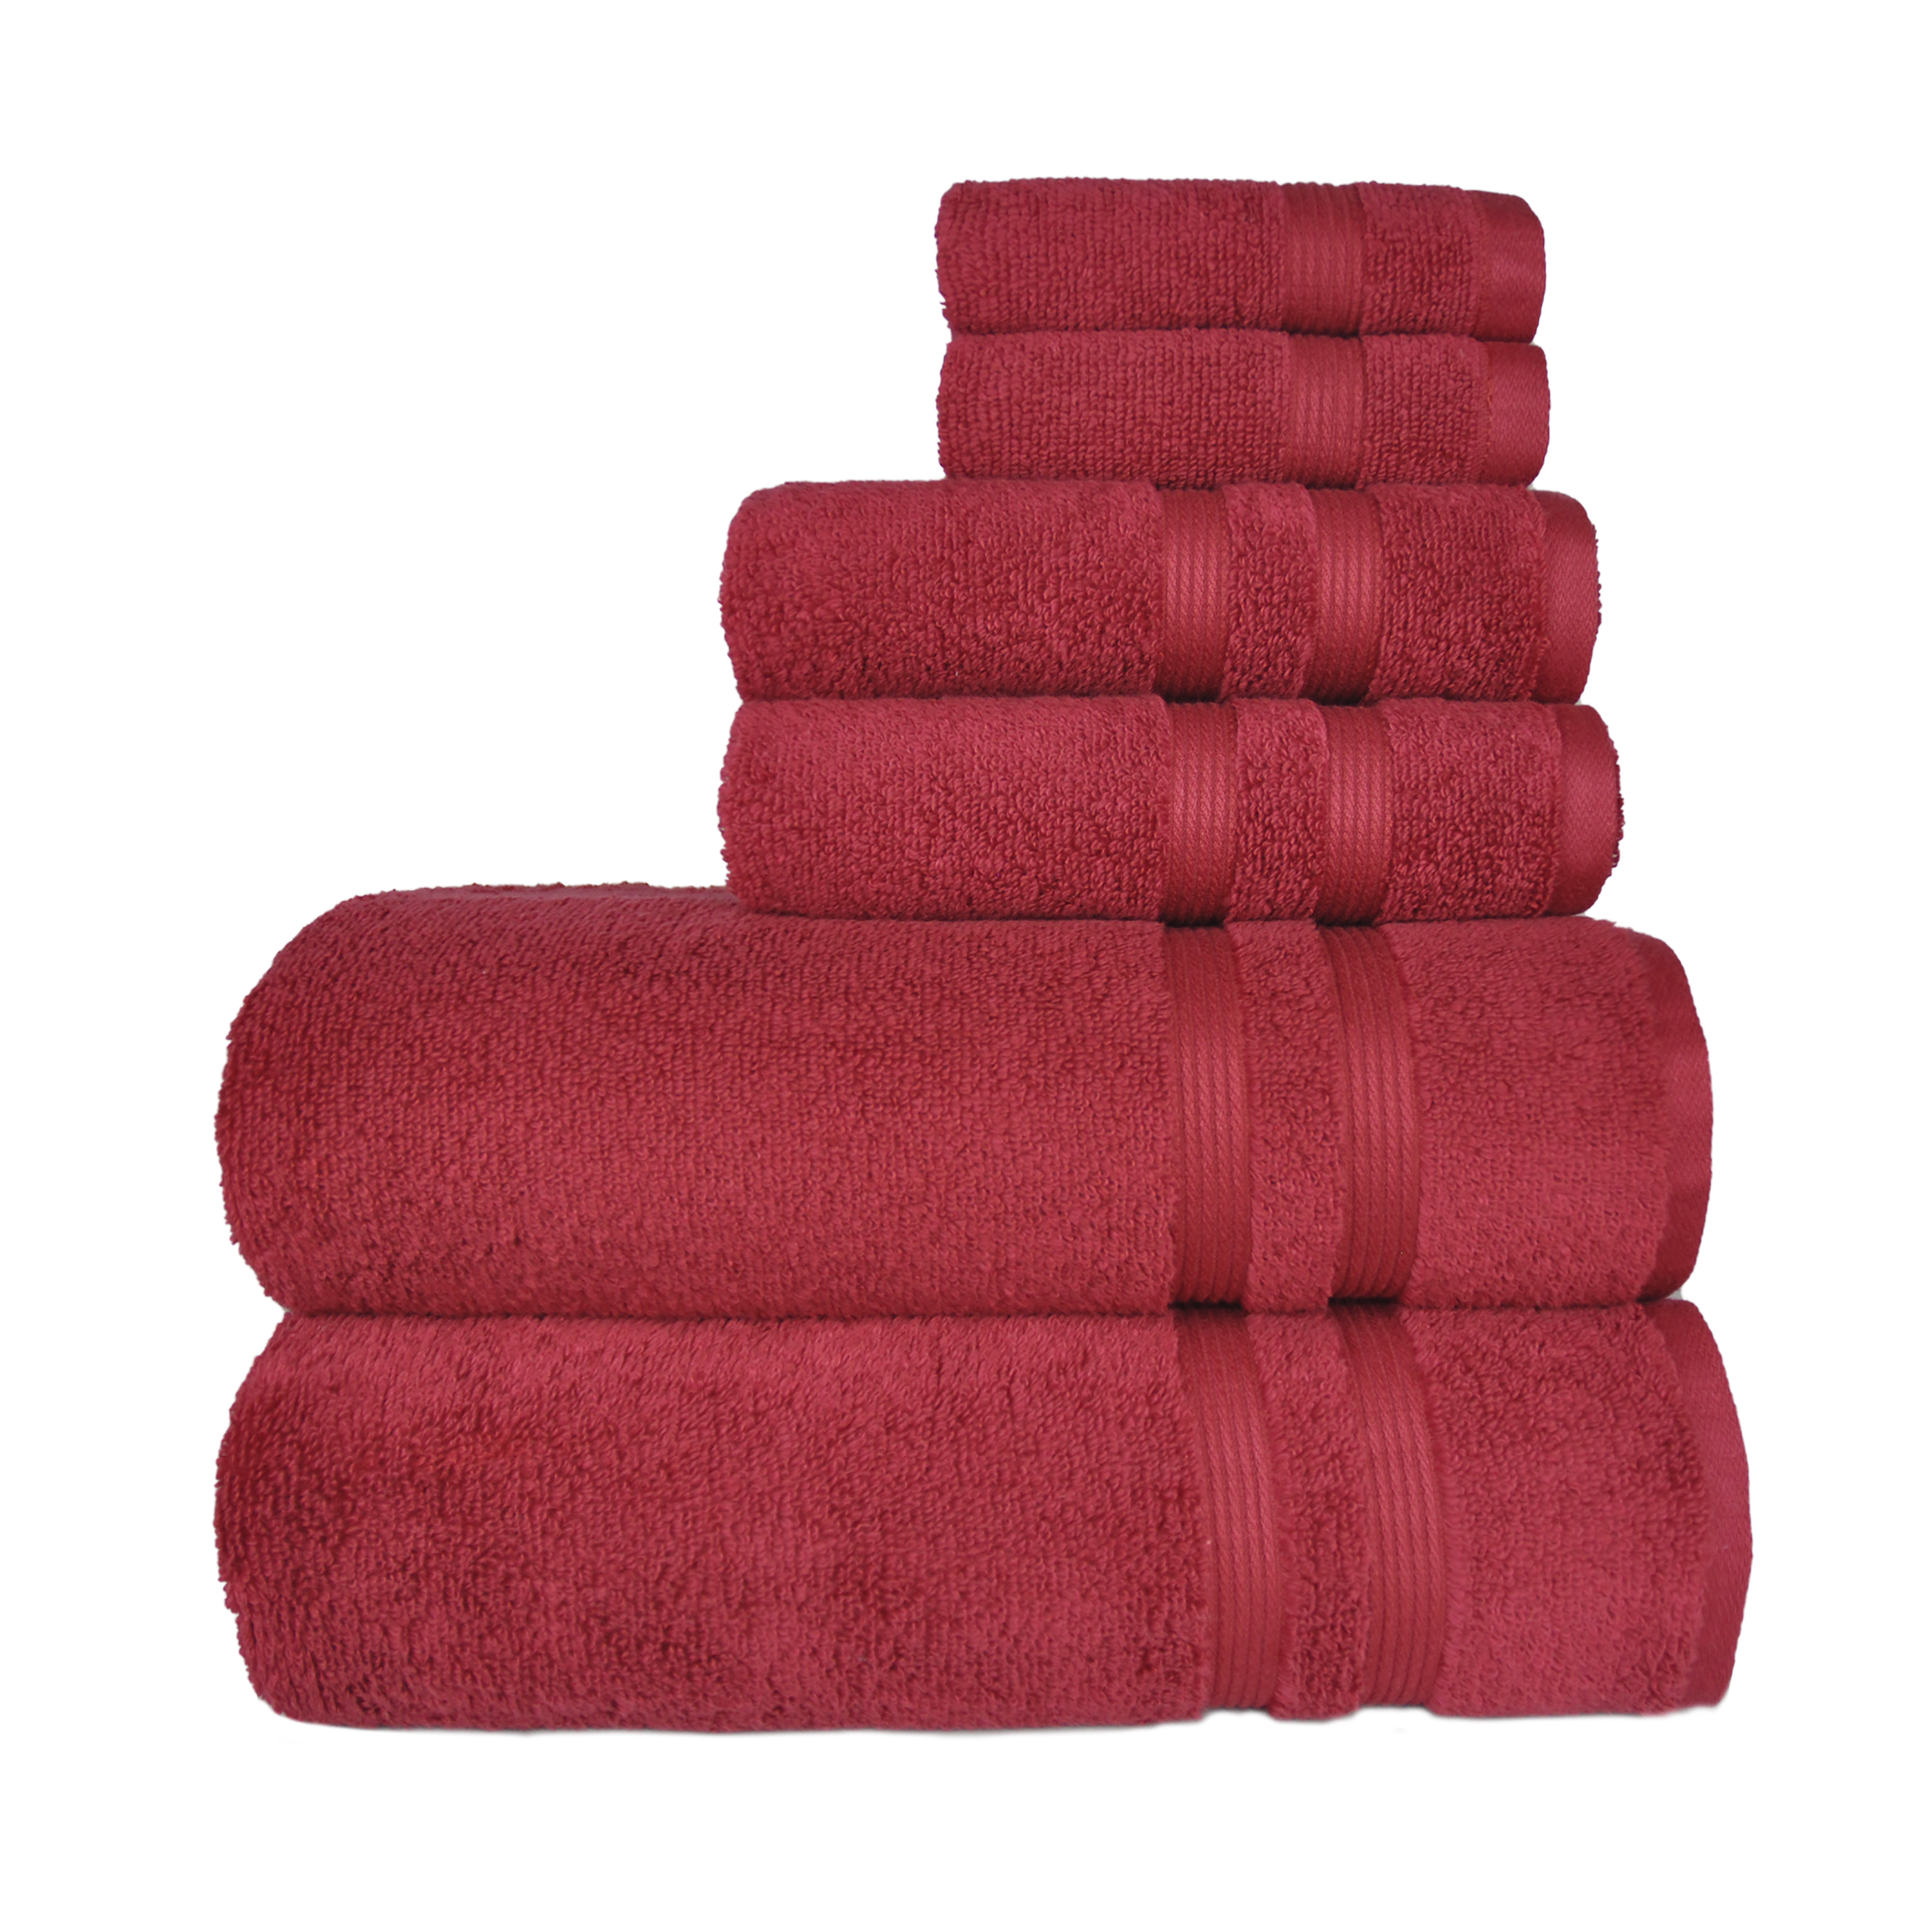 Mainstays Performance Solid 6 Piece Towel Set, Red - image 3 of 7